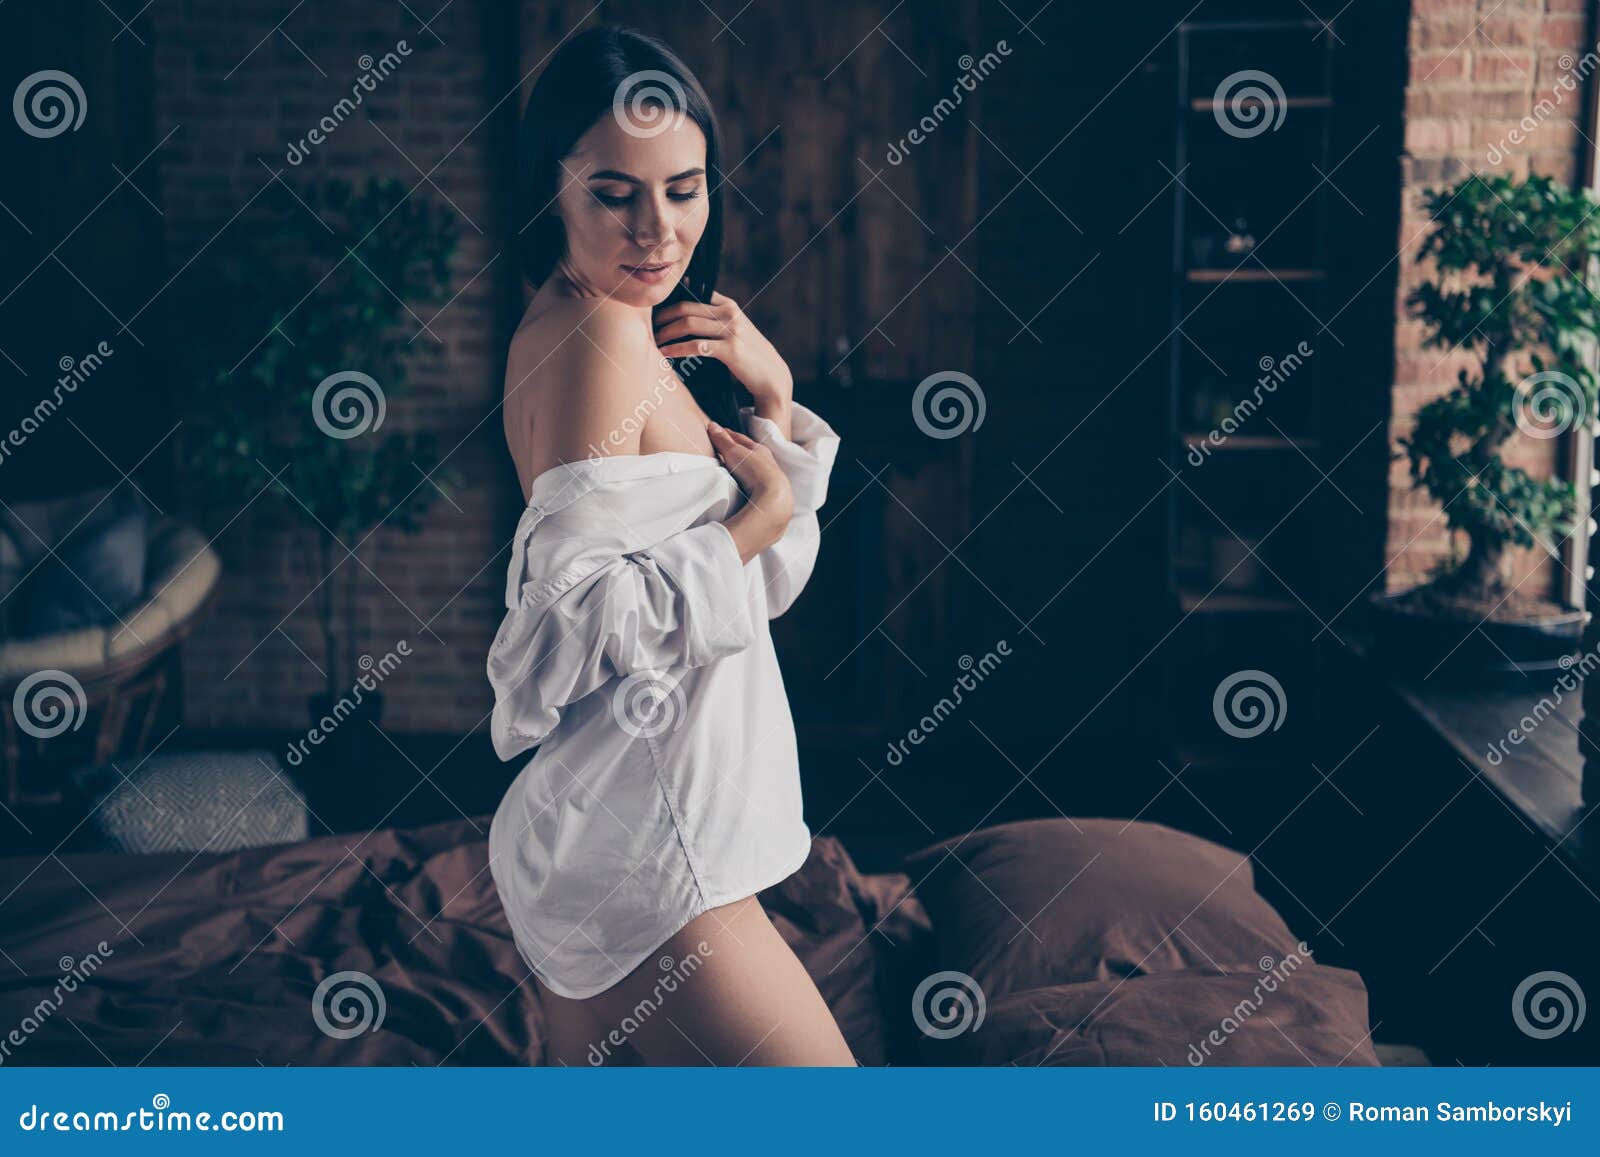 Woman Taking Off Shirt Bed Stock Photos - Free & Royalty-Free